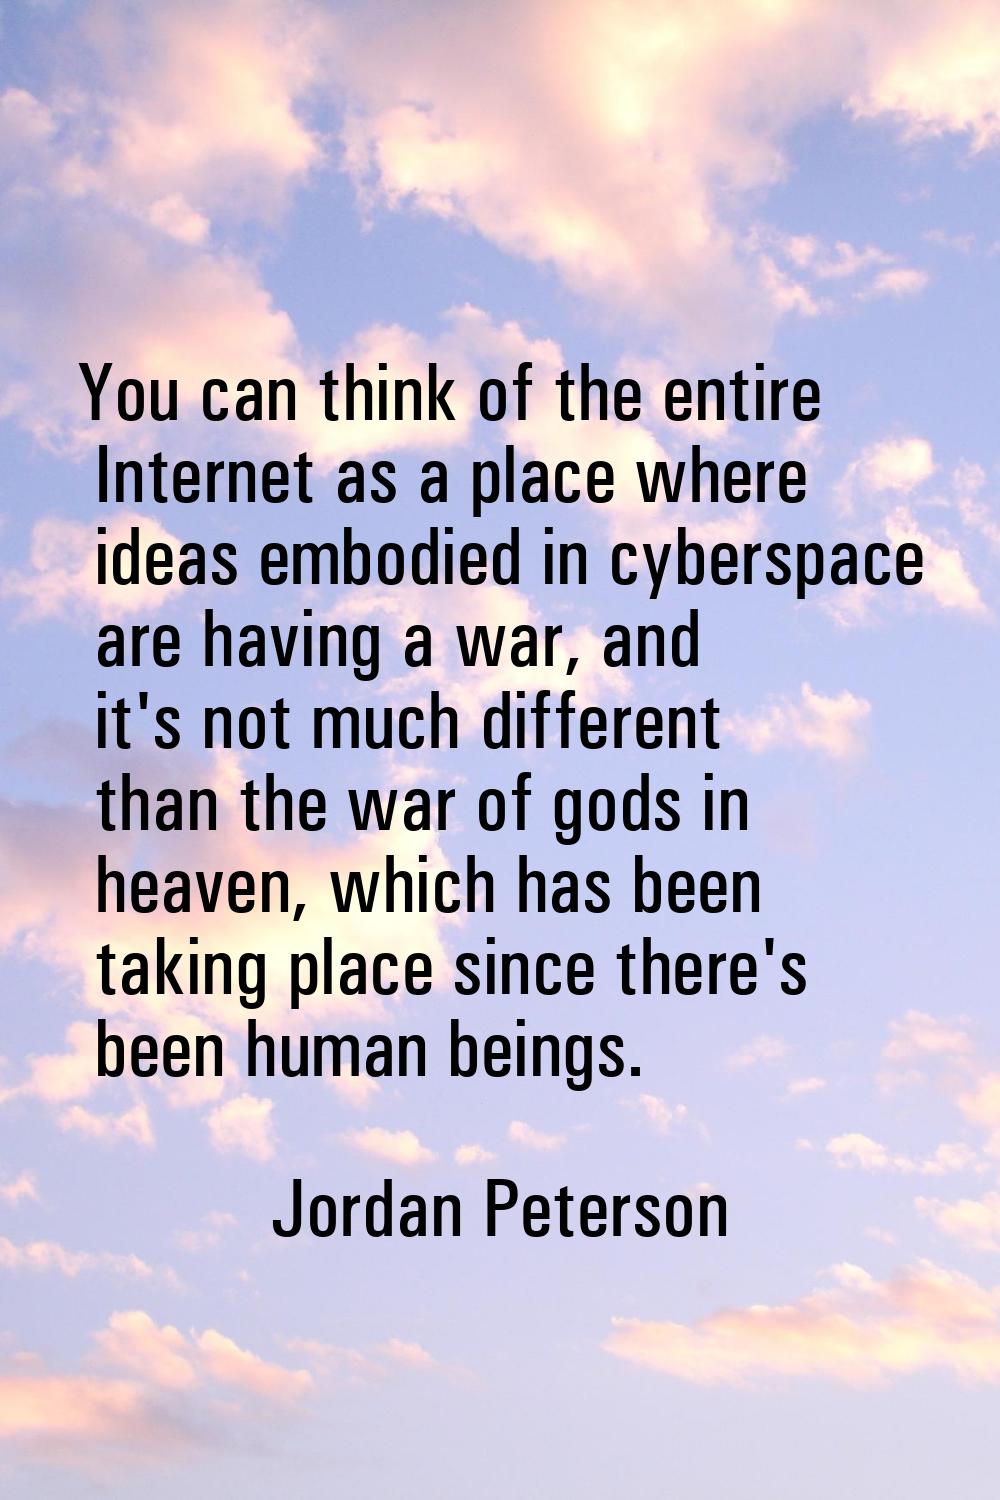 You can think of the entire Internet as a place where ideas embodied in cyberspace are having a war